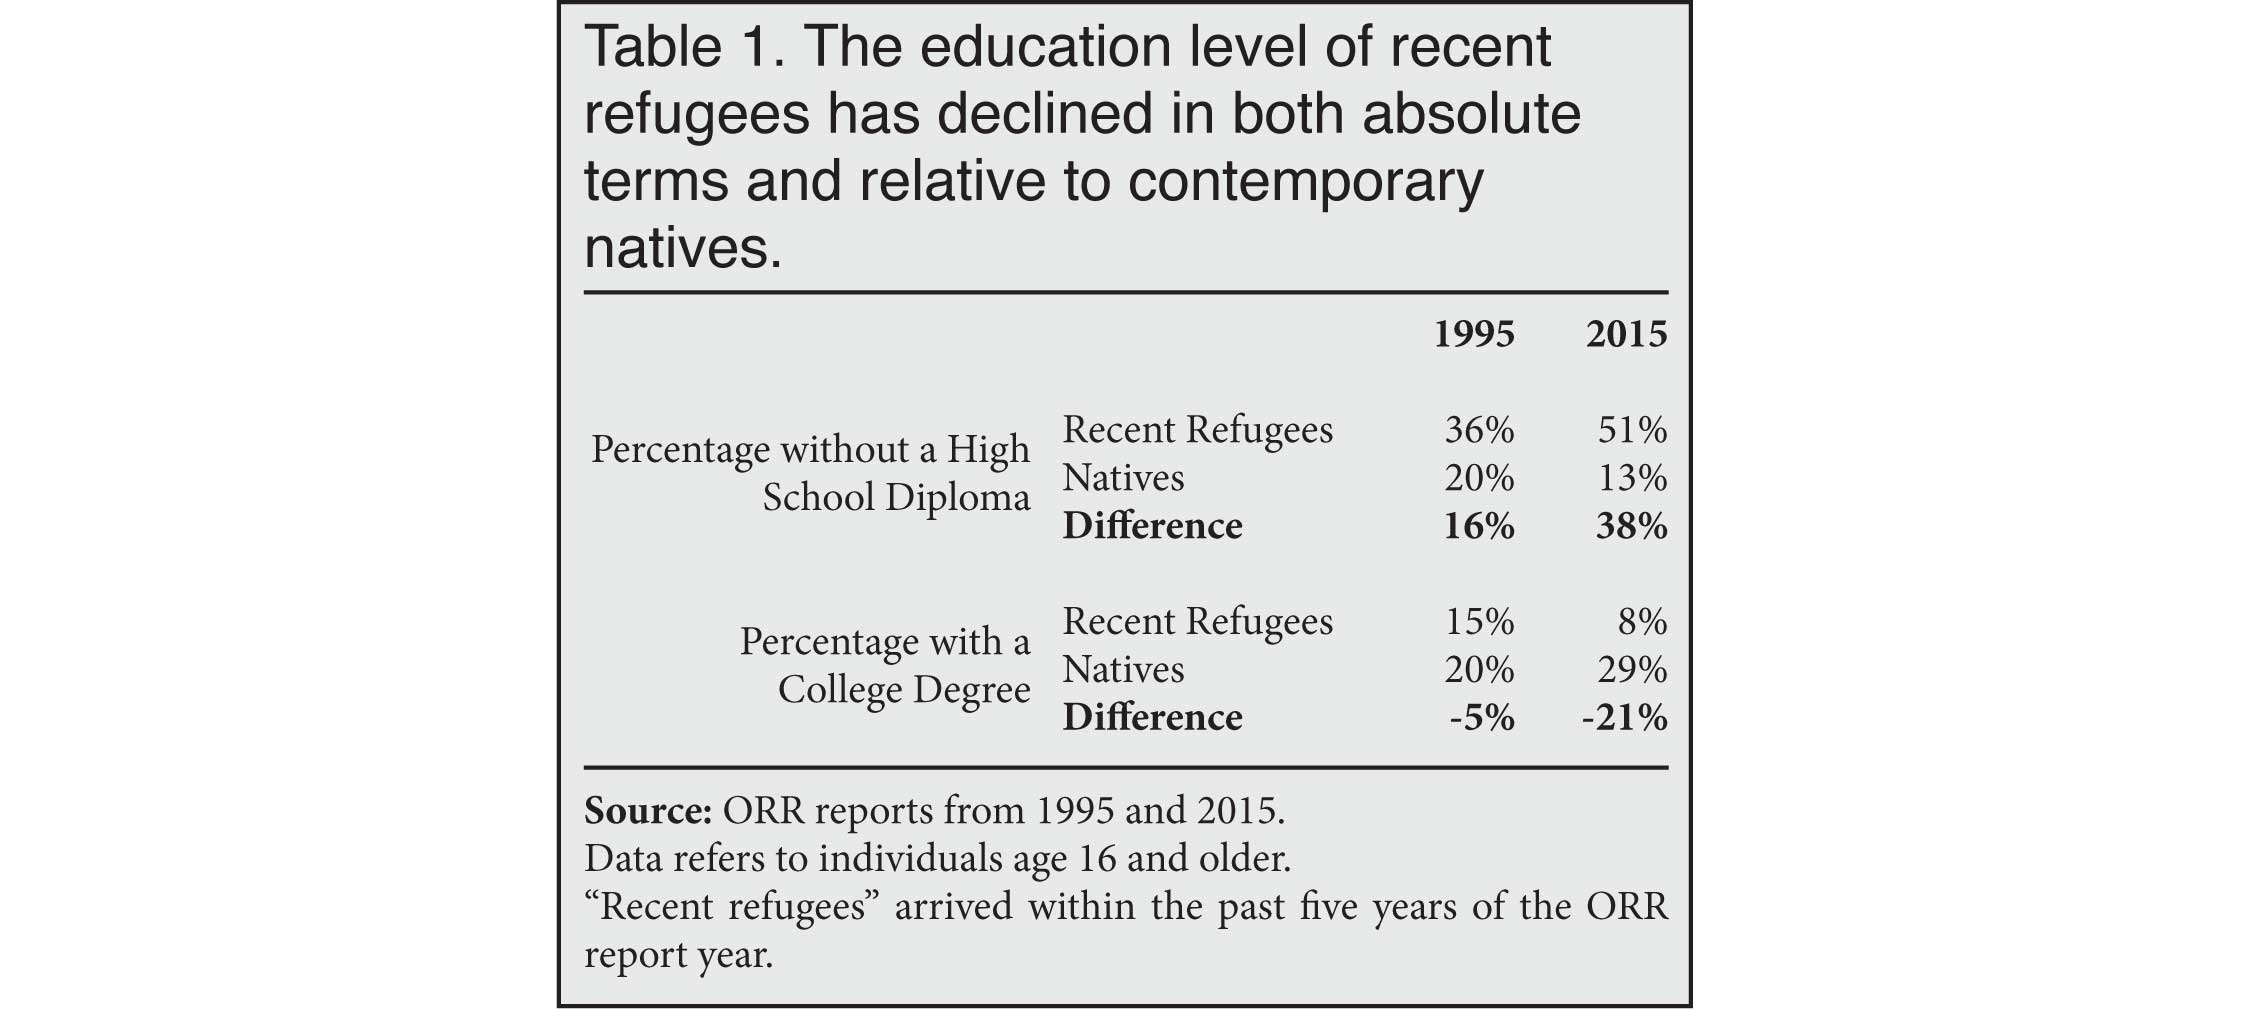 Table: Education Level of recent refugees has declined in both absolute terms and relative to contemporary natives